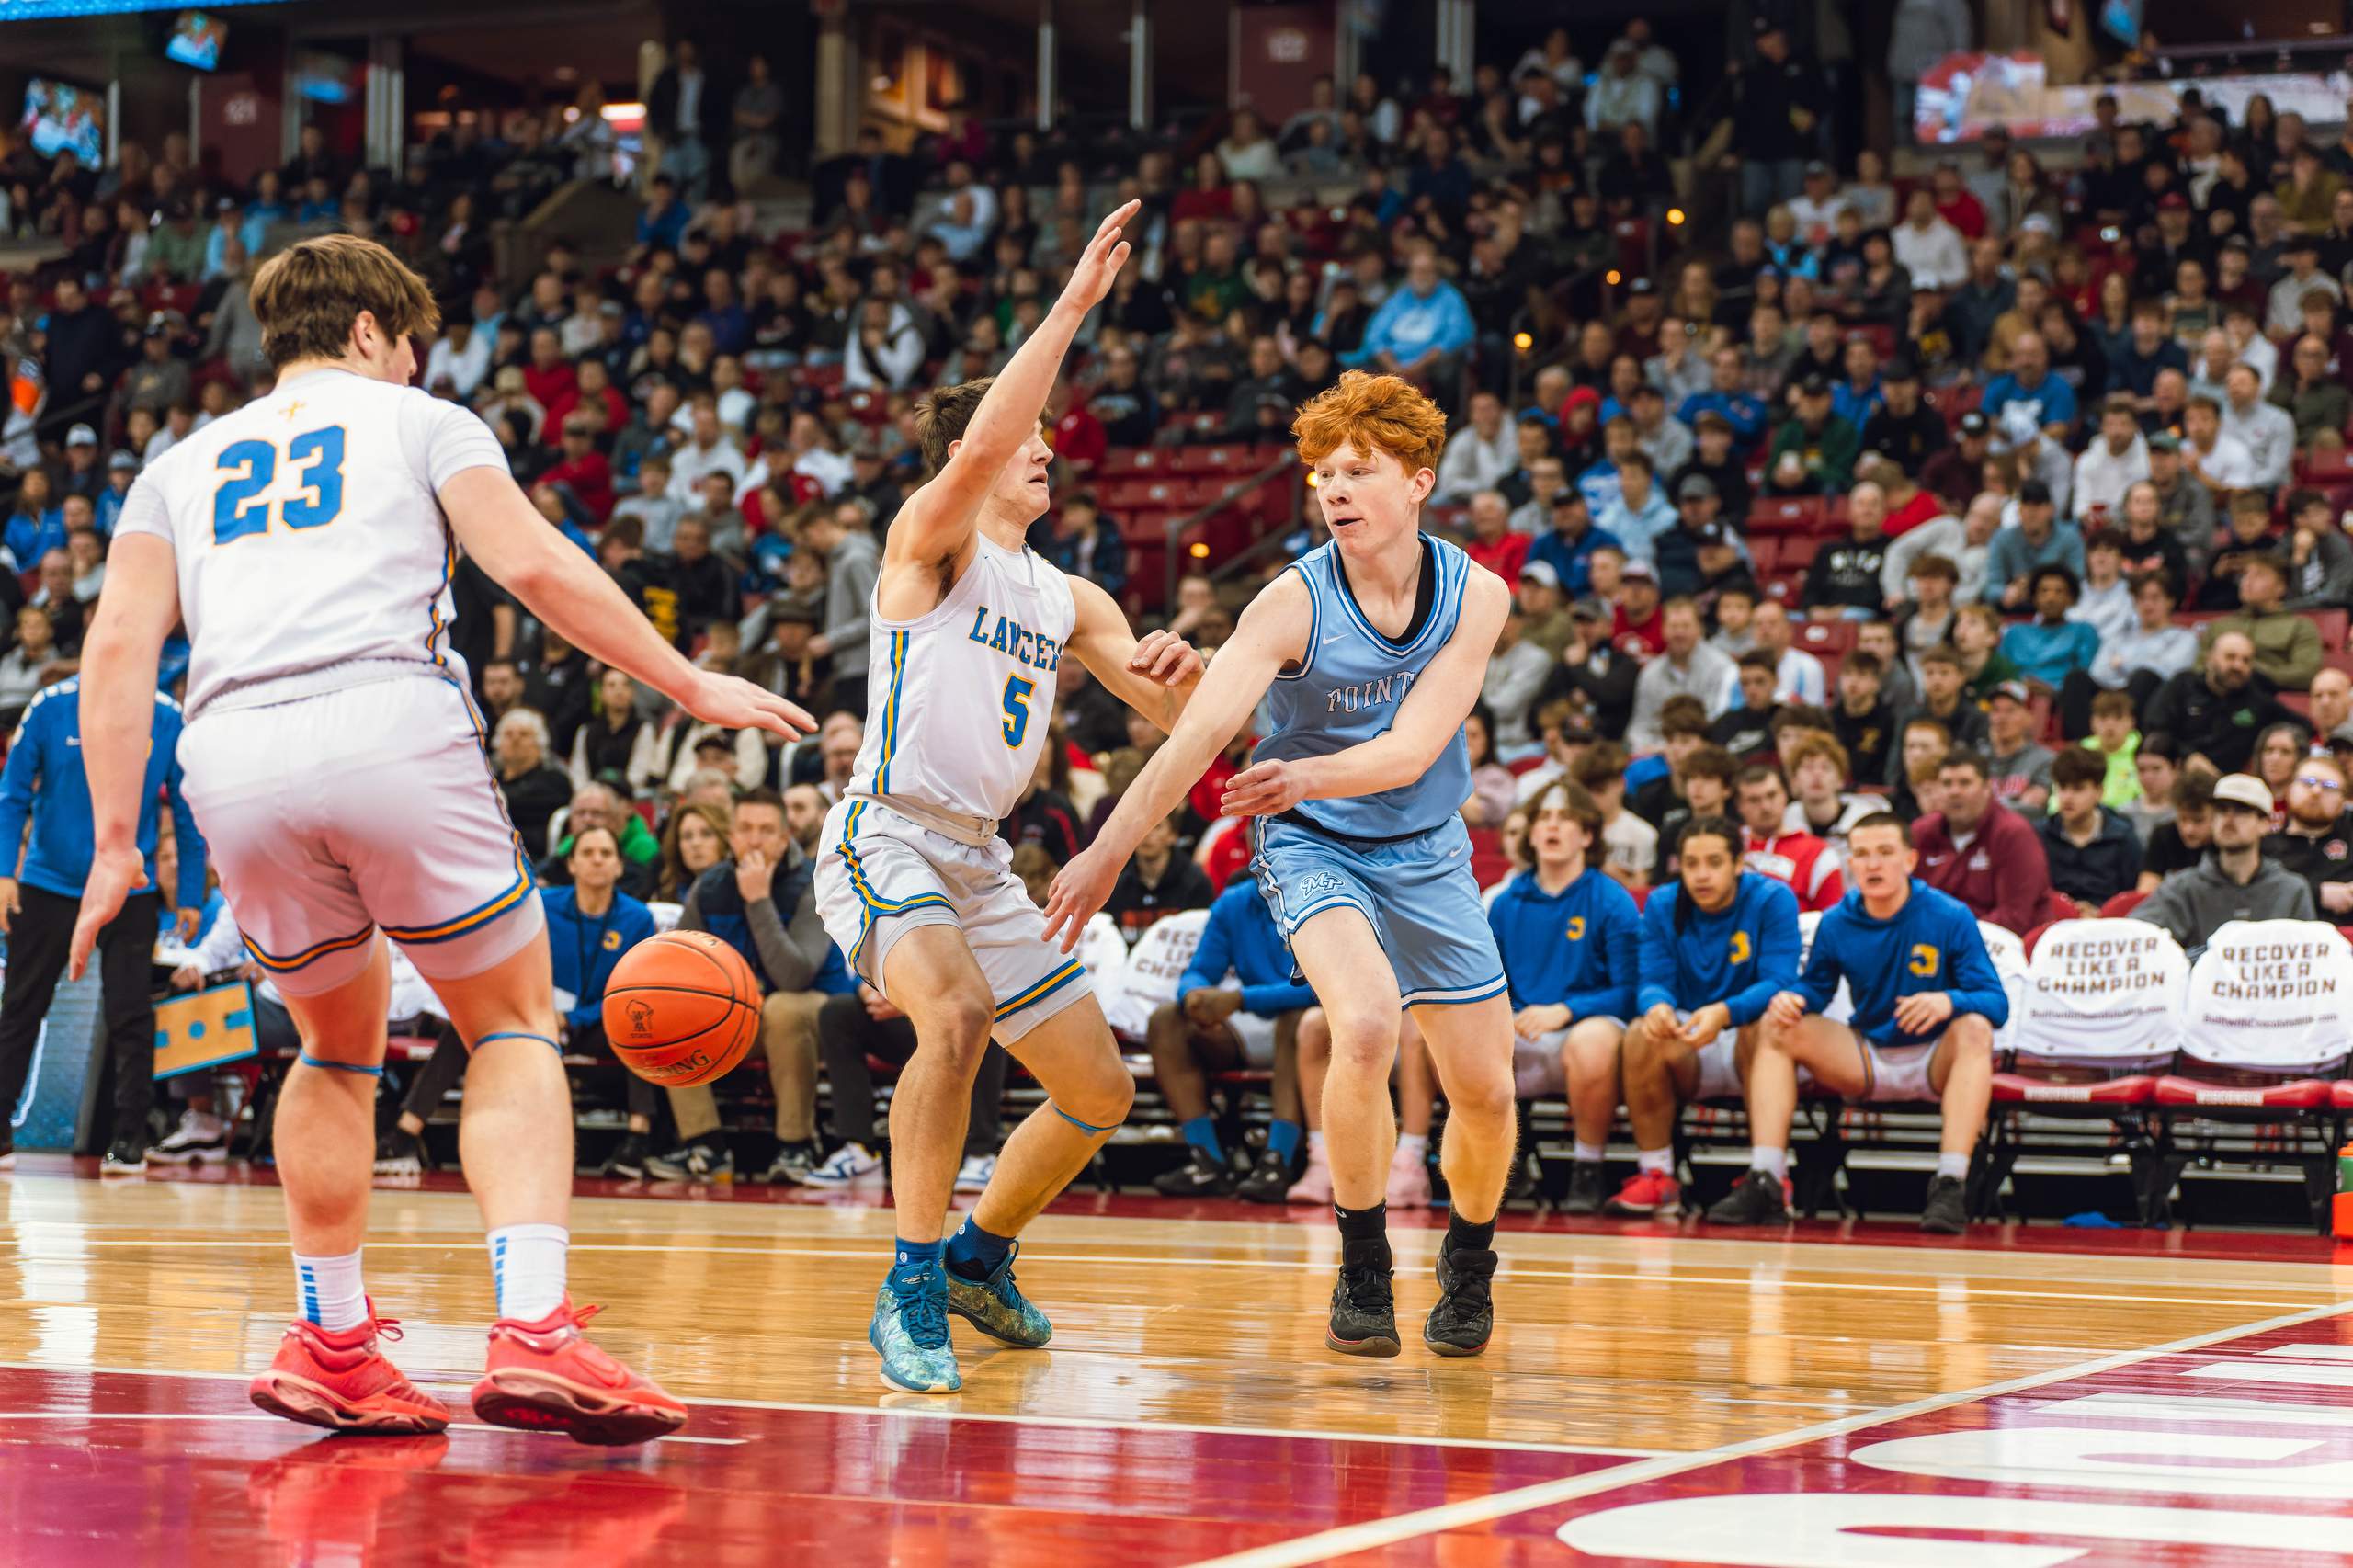 WIAA Boys Division 4 Championship Game between Mineral Point and Kenosha St. Joseph Catholic, photography by Ross Harried for Second Crop Sports